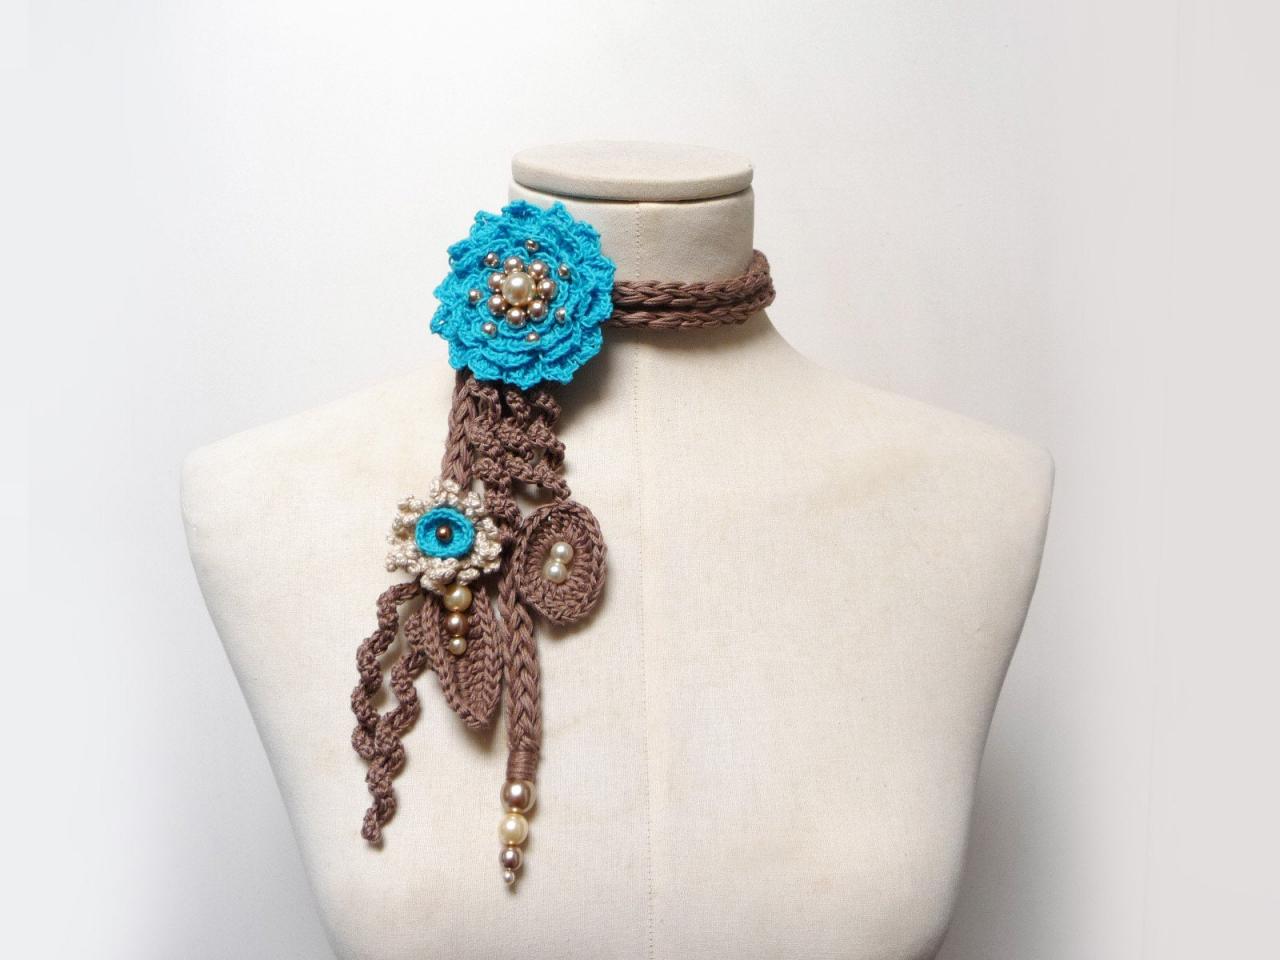 Crochet Lariat Necklace With Turquoise Flower And Brown Leaves, Cotton Statement Necklace, Summer Jewelry, Boho Lariat, Friend Gift